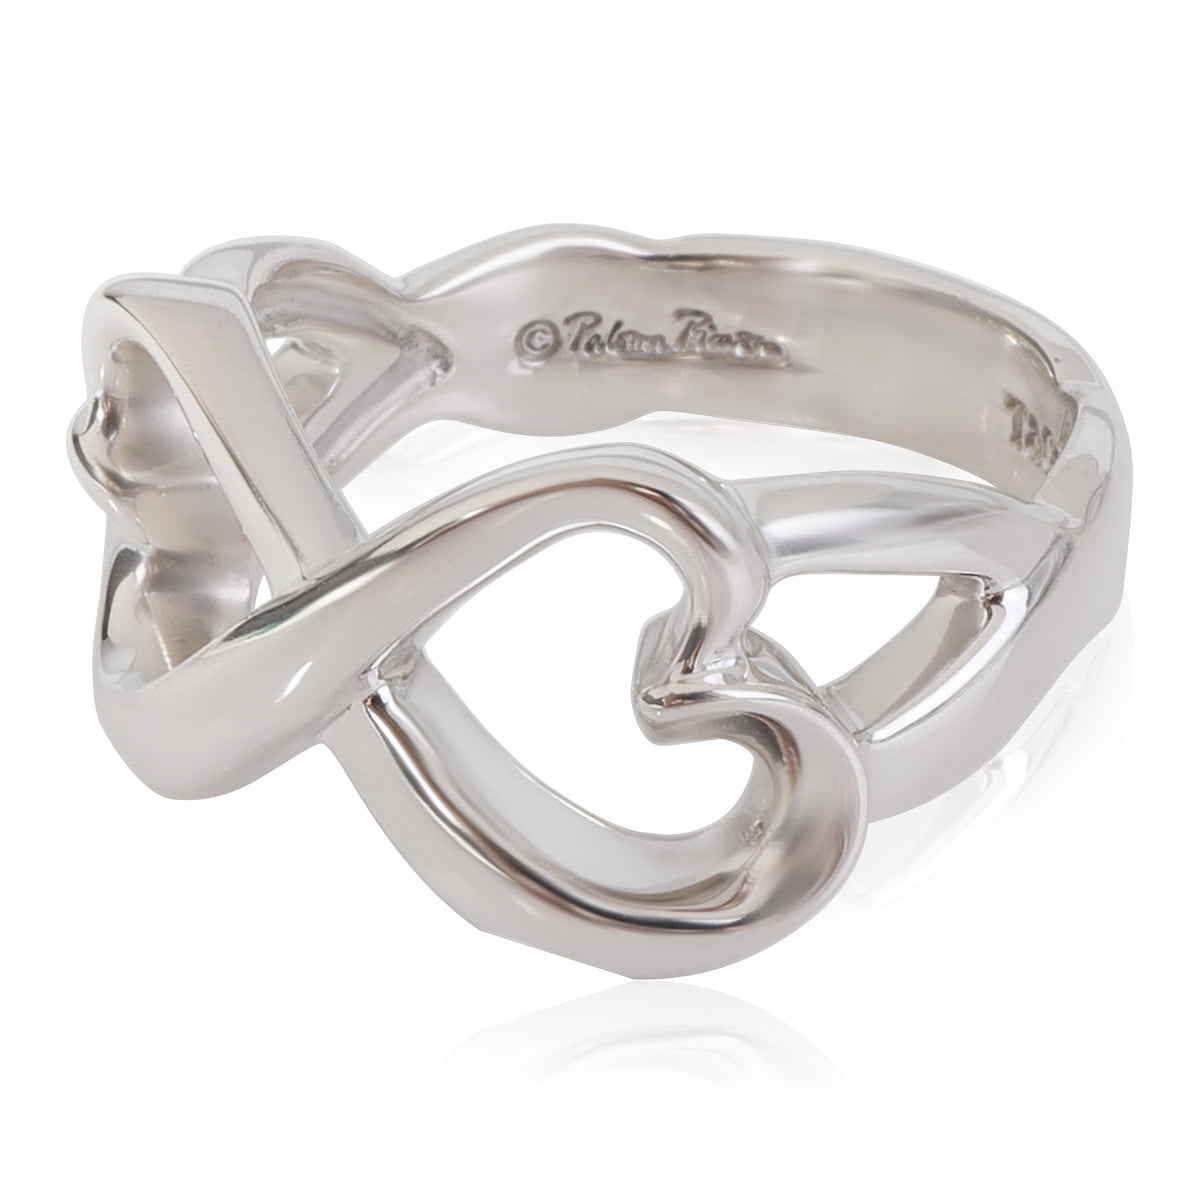 Tiffany & Co. Paloma Picasso Infinity Ring in Sterling Silver